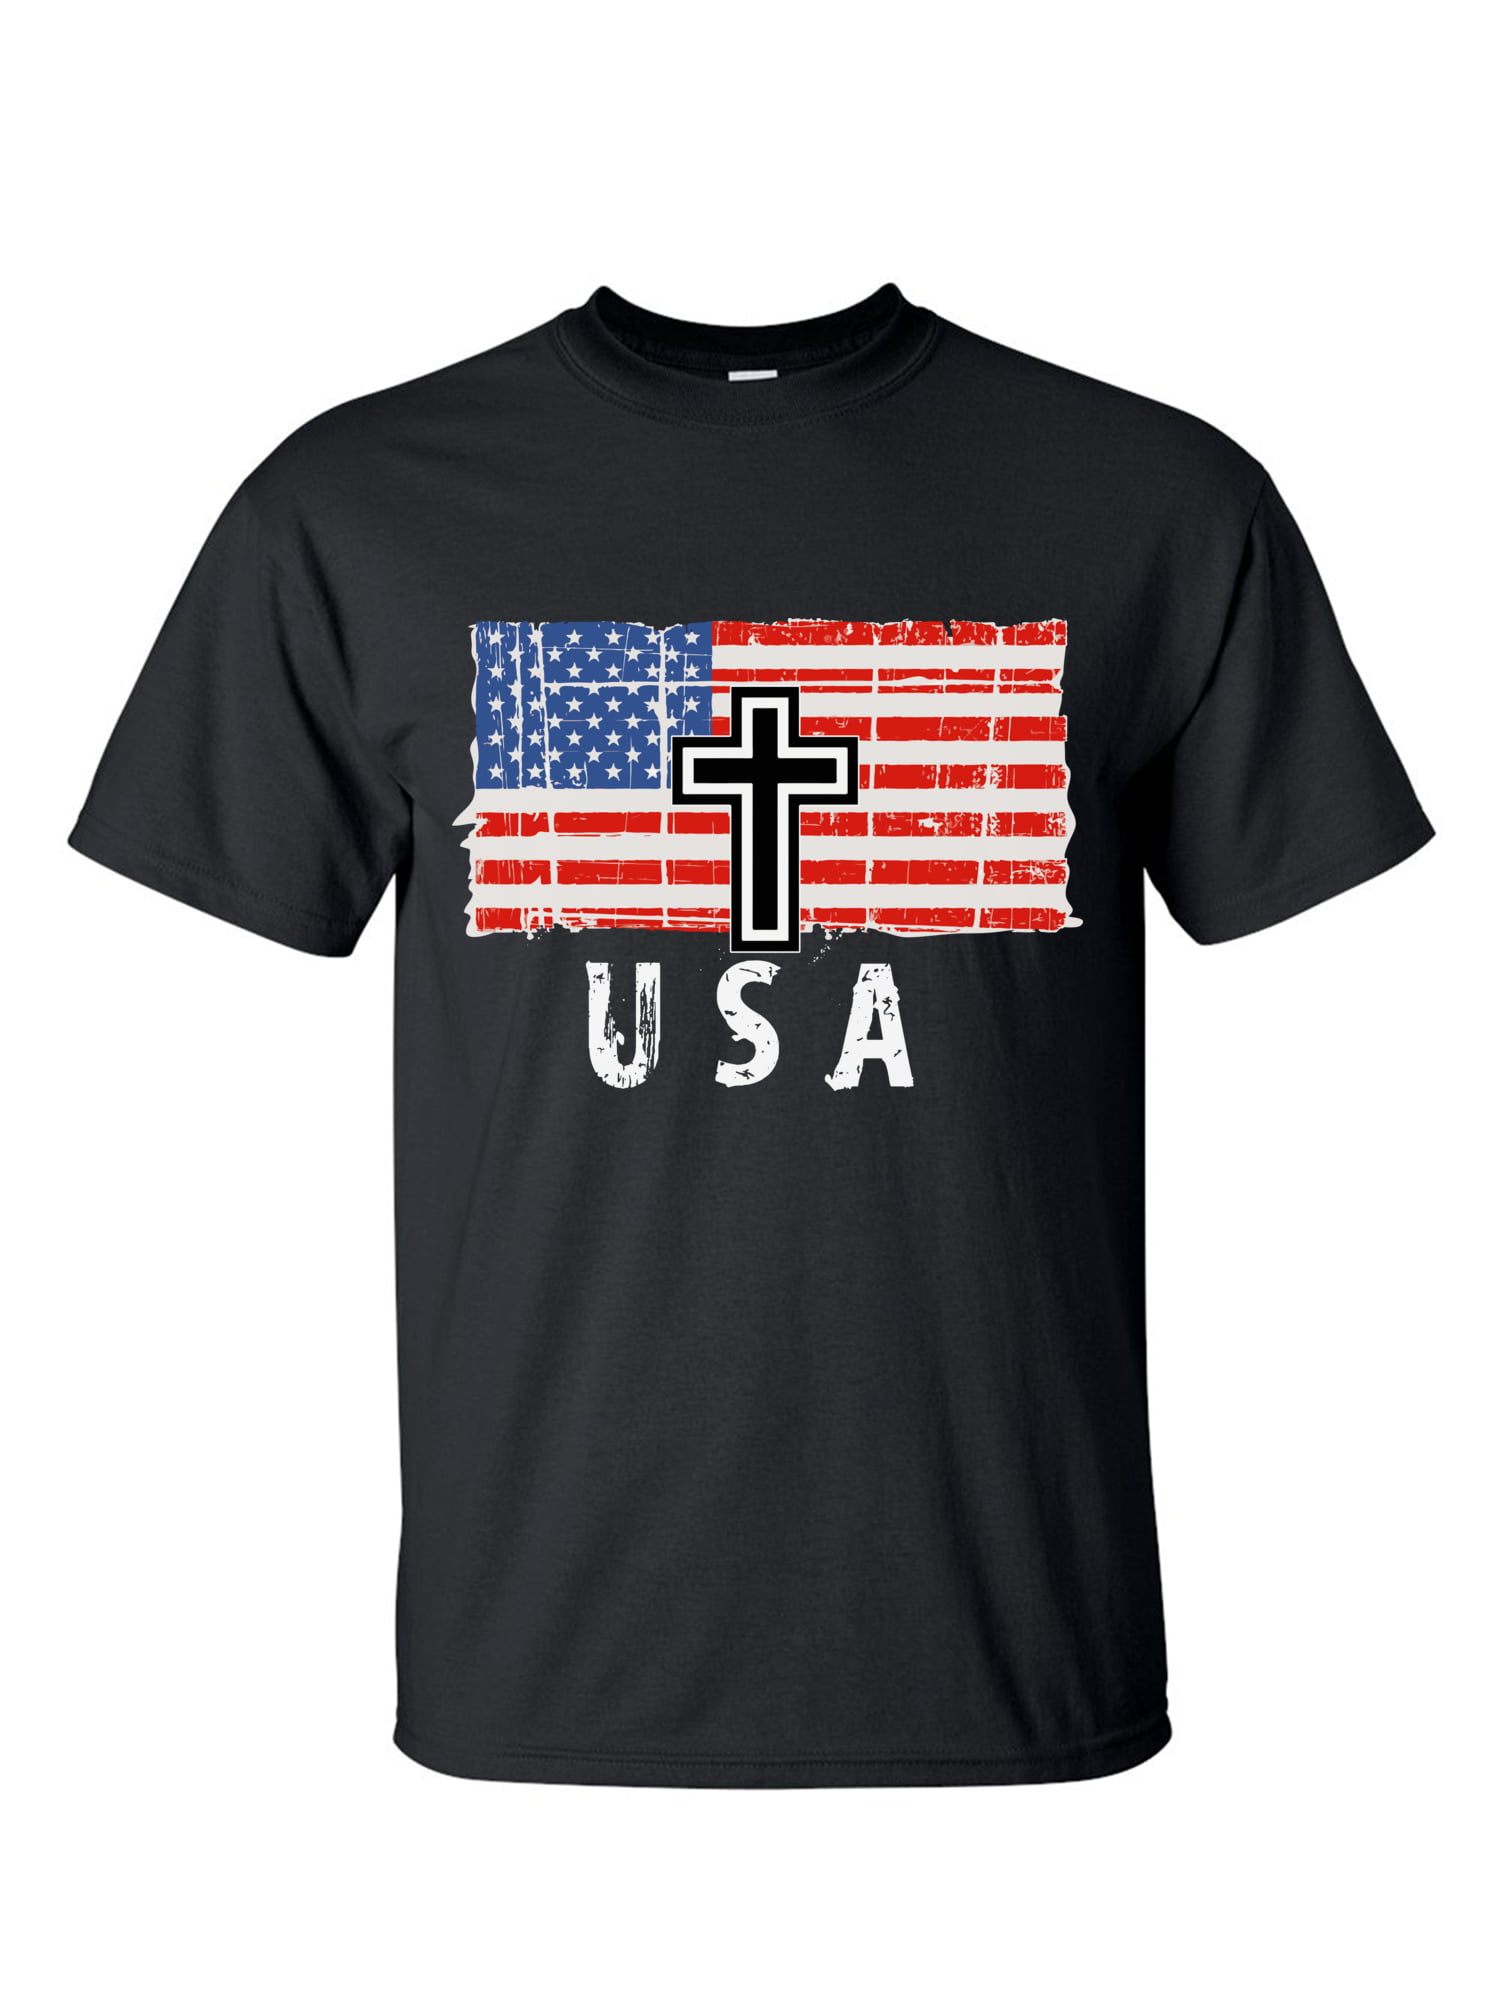 big and tall t-shirt for men USA American flag pride patriotic july 4th tall tee 